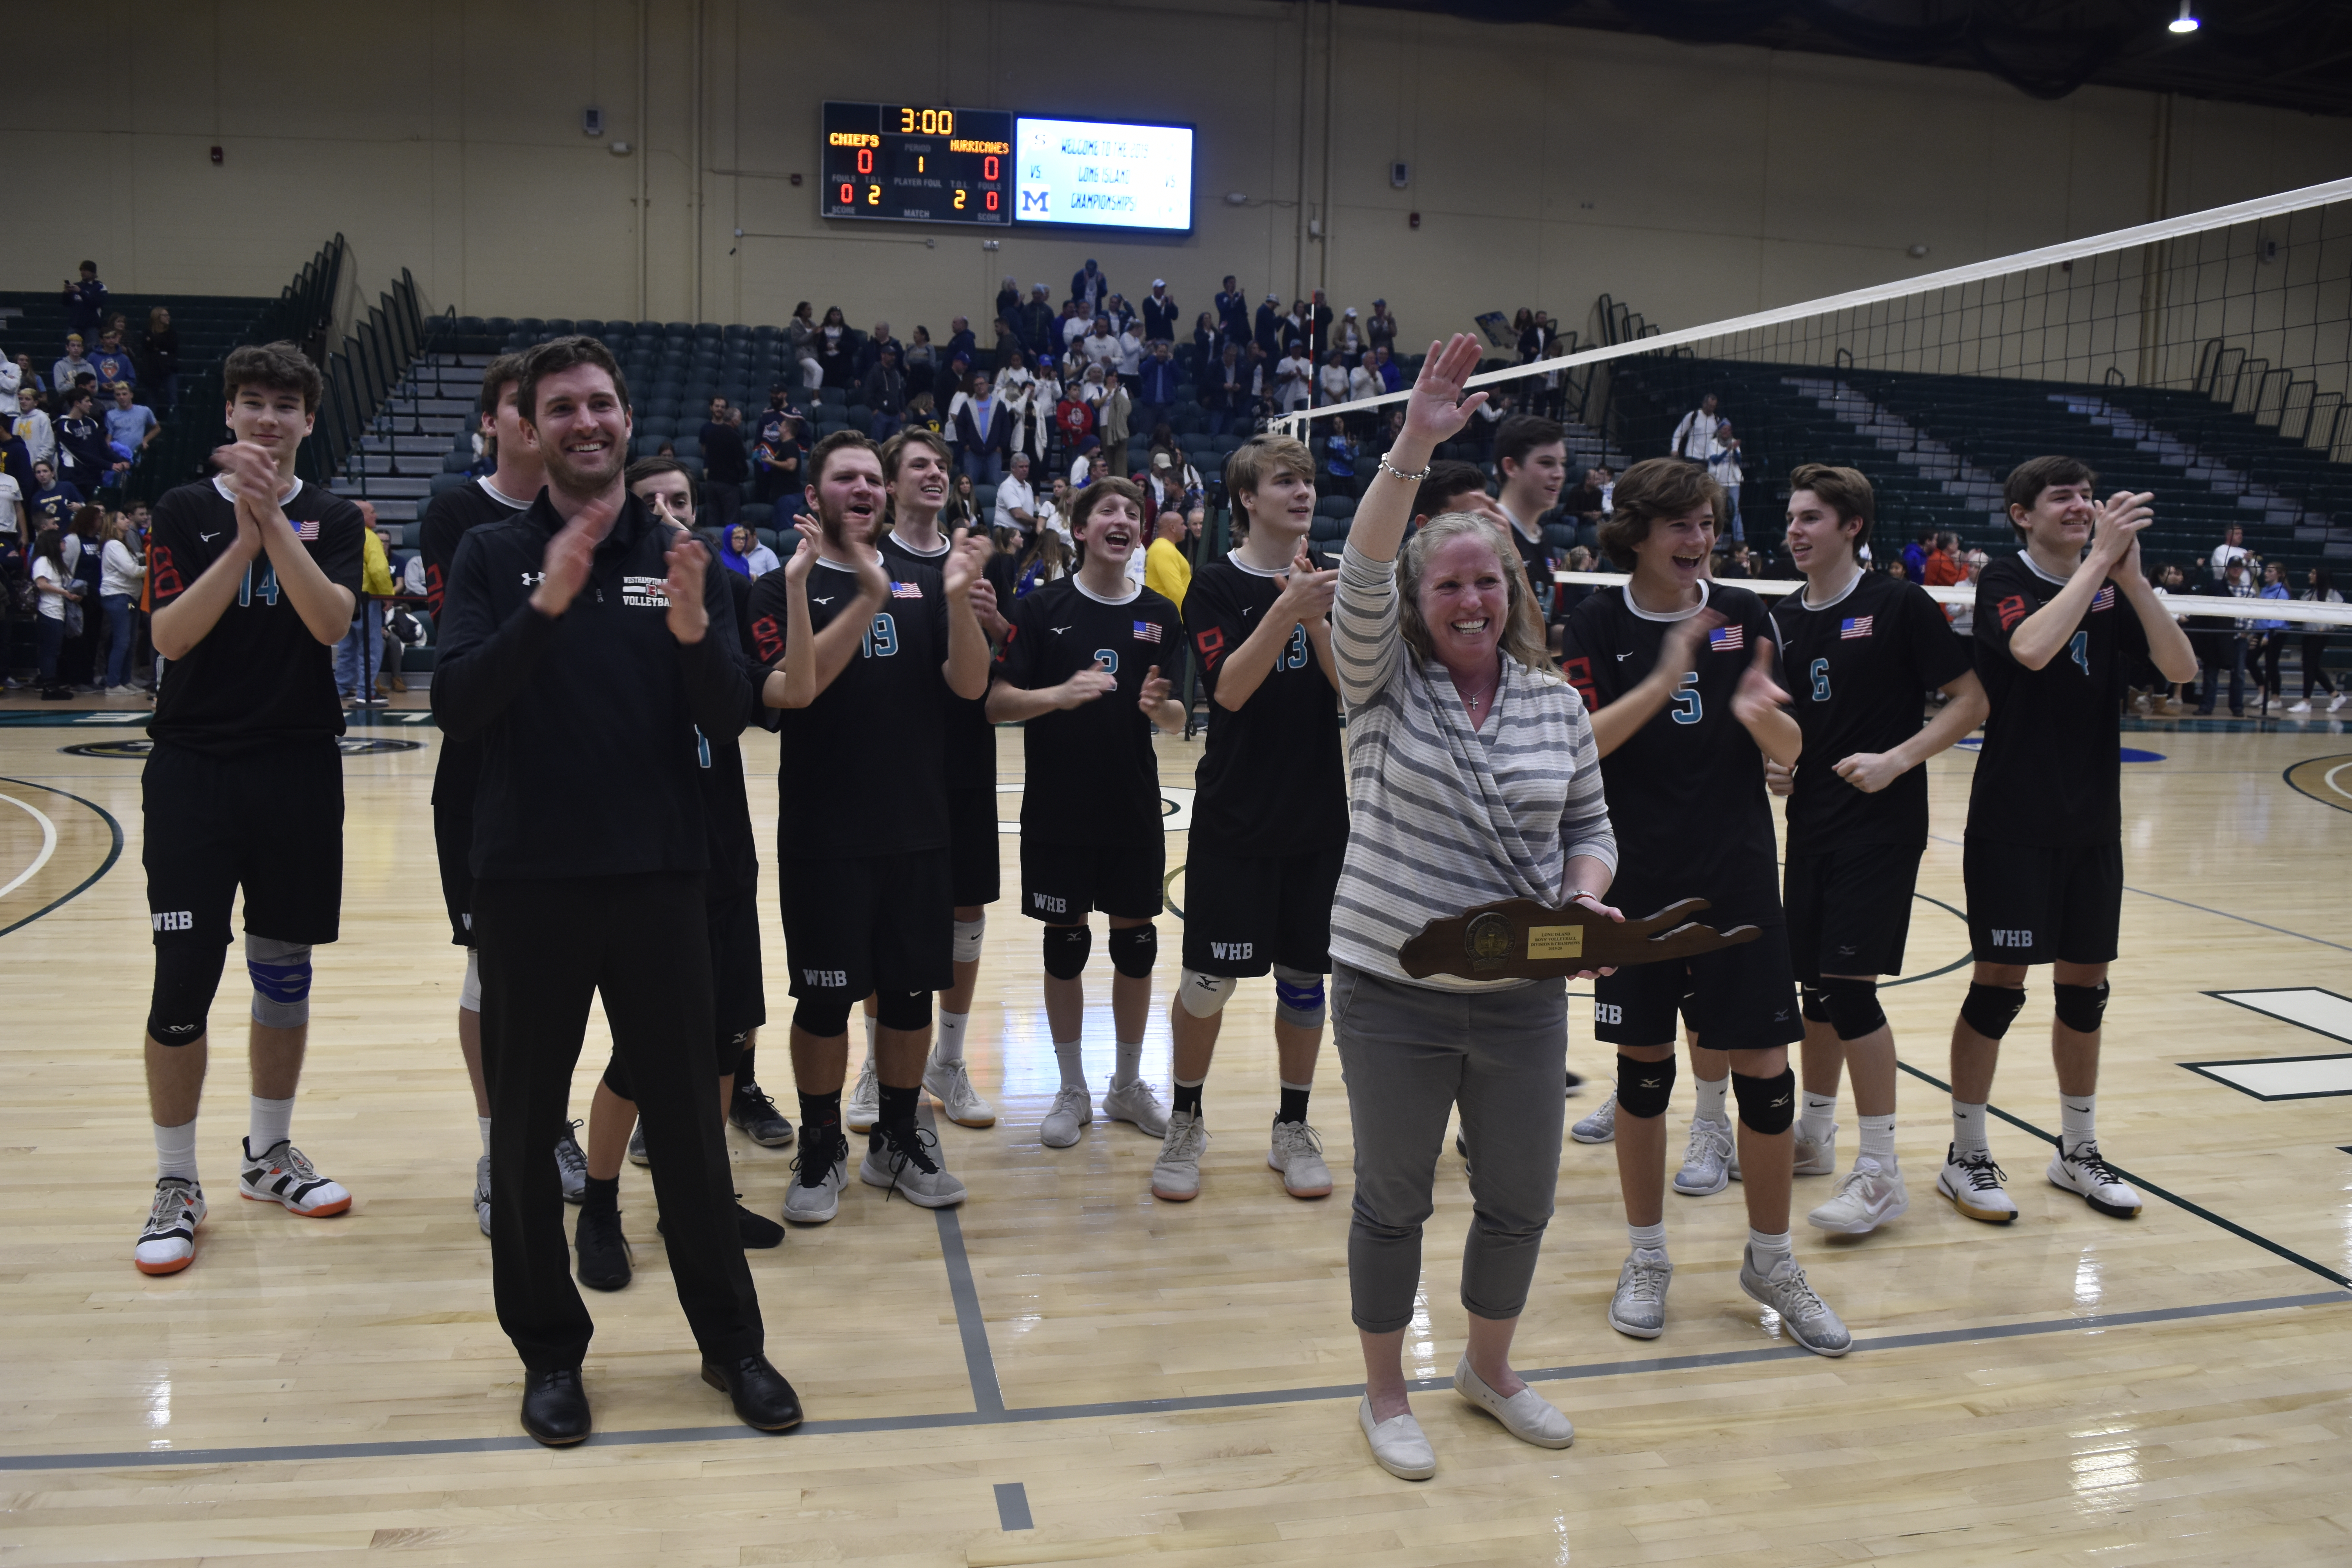 The Westhampton Beach boys volleyball team thanks the community for its support after winning the Long Island Division II Championship on Tuesday night.